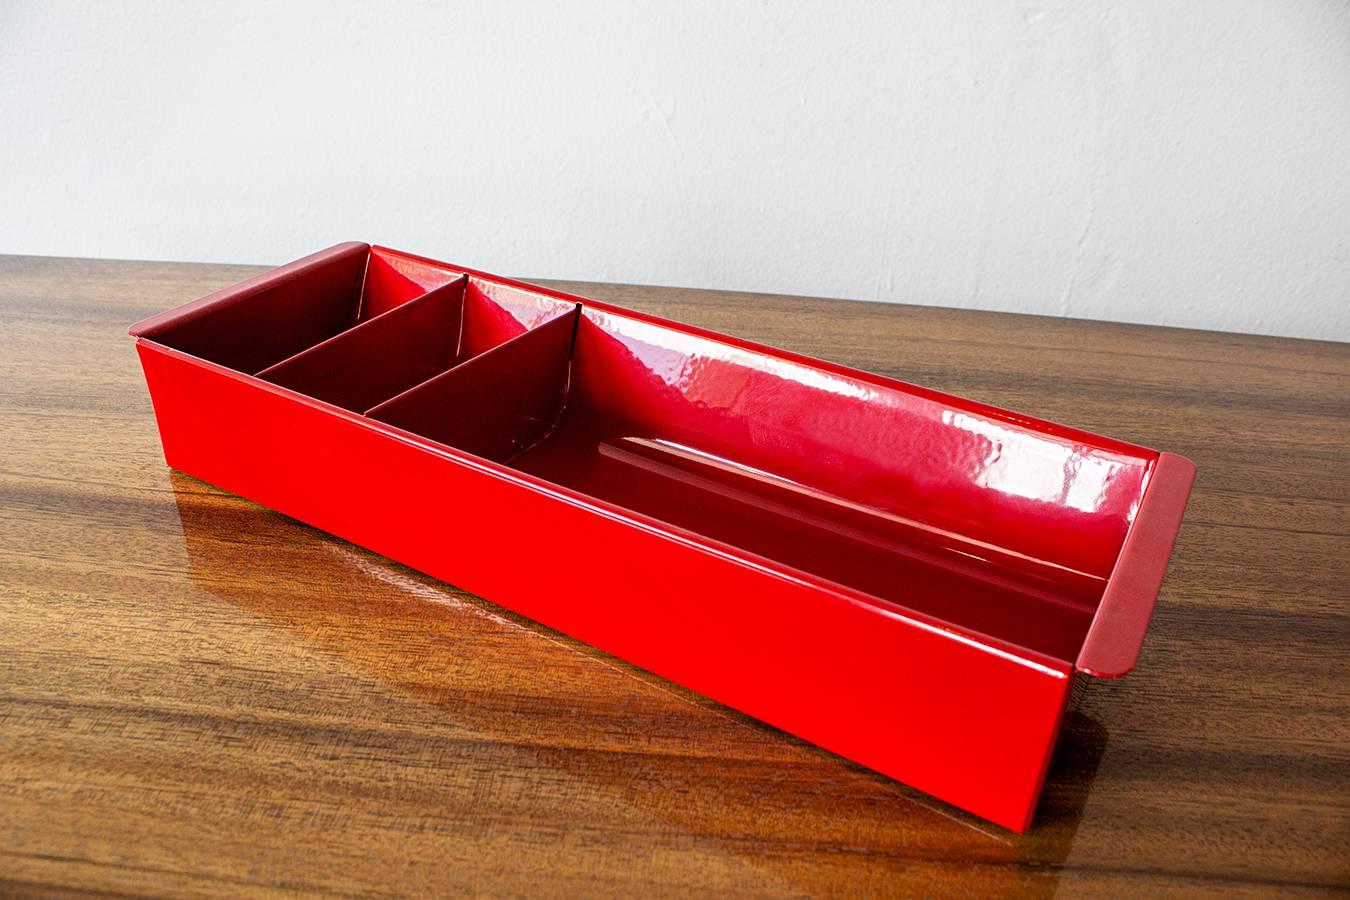 Once the insert to a Classic tanker desk's utility drawer, we repurposed this neat Industrial piece for use as a desktop organizer. Steel has been newly powder-coated in a pop of red. Features three slots, ideal for storing coins, pens and pencils